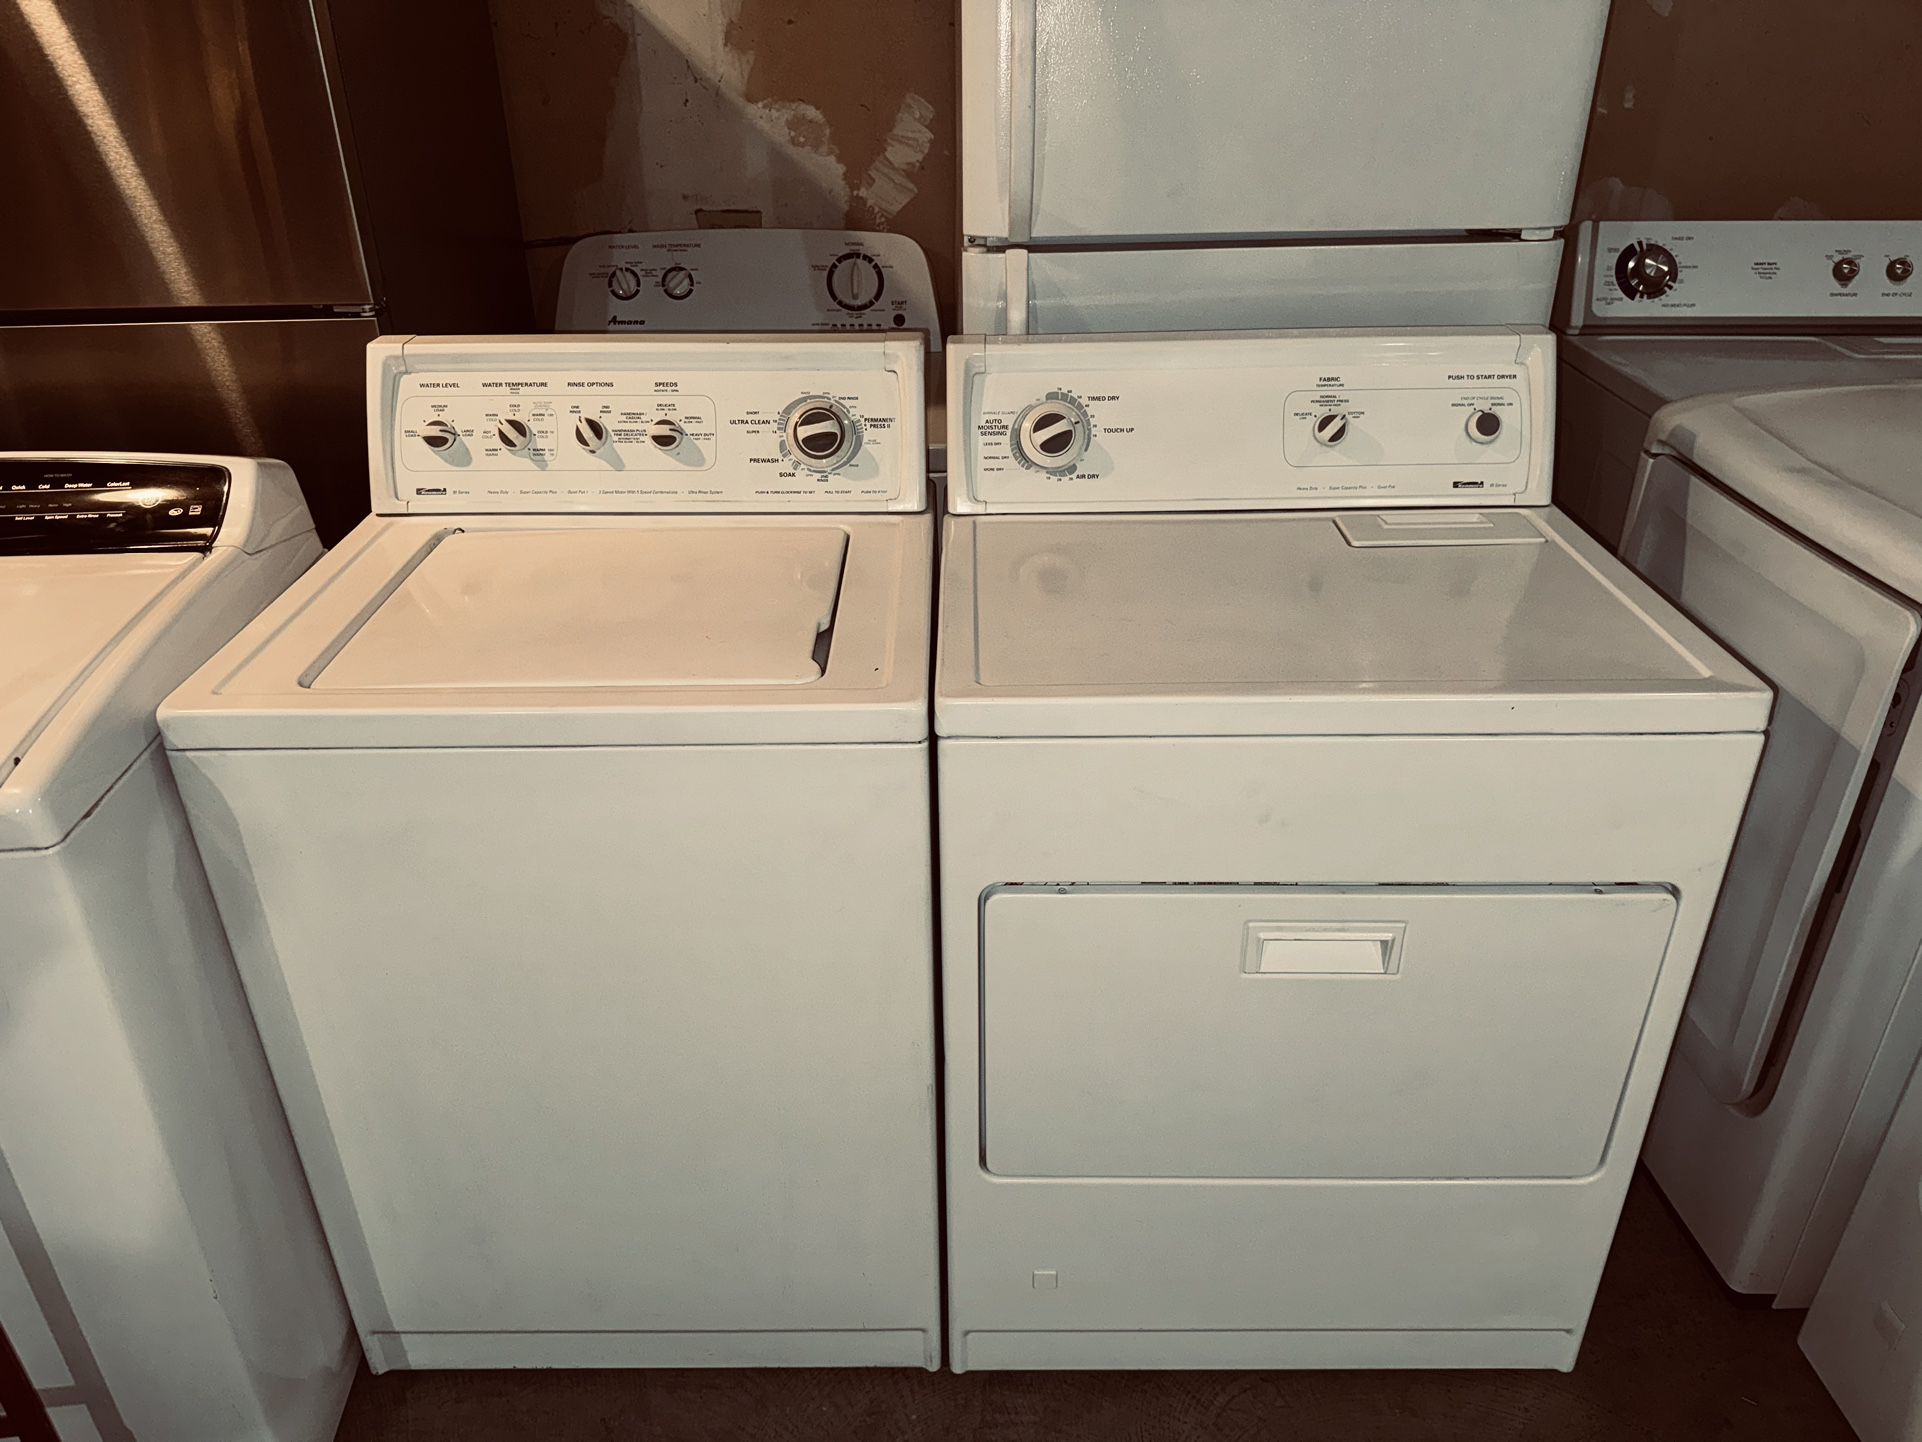 Kenmore Washer And Gas Dryer Works Perfect 3 Month Warranty We Deliver 